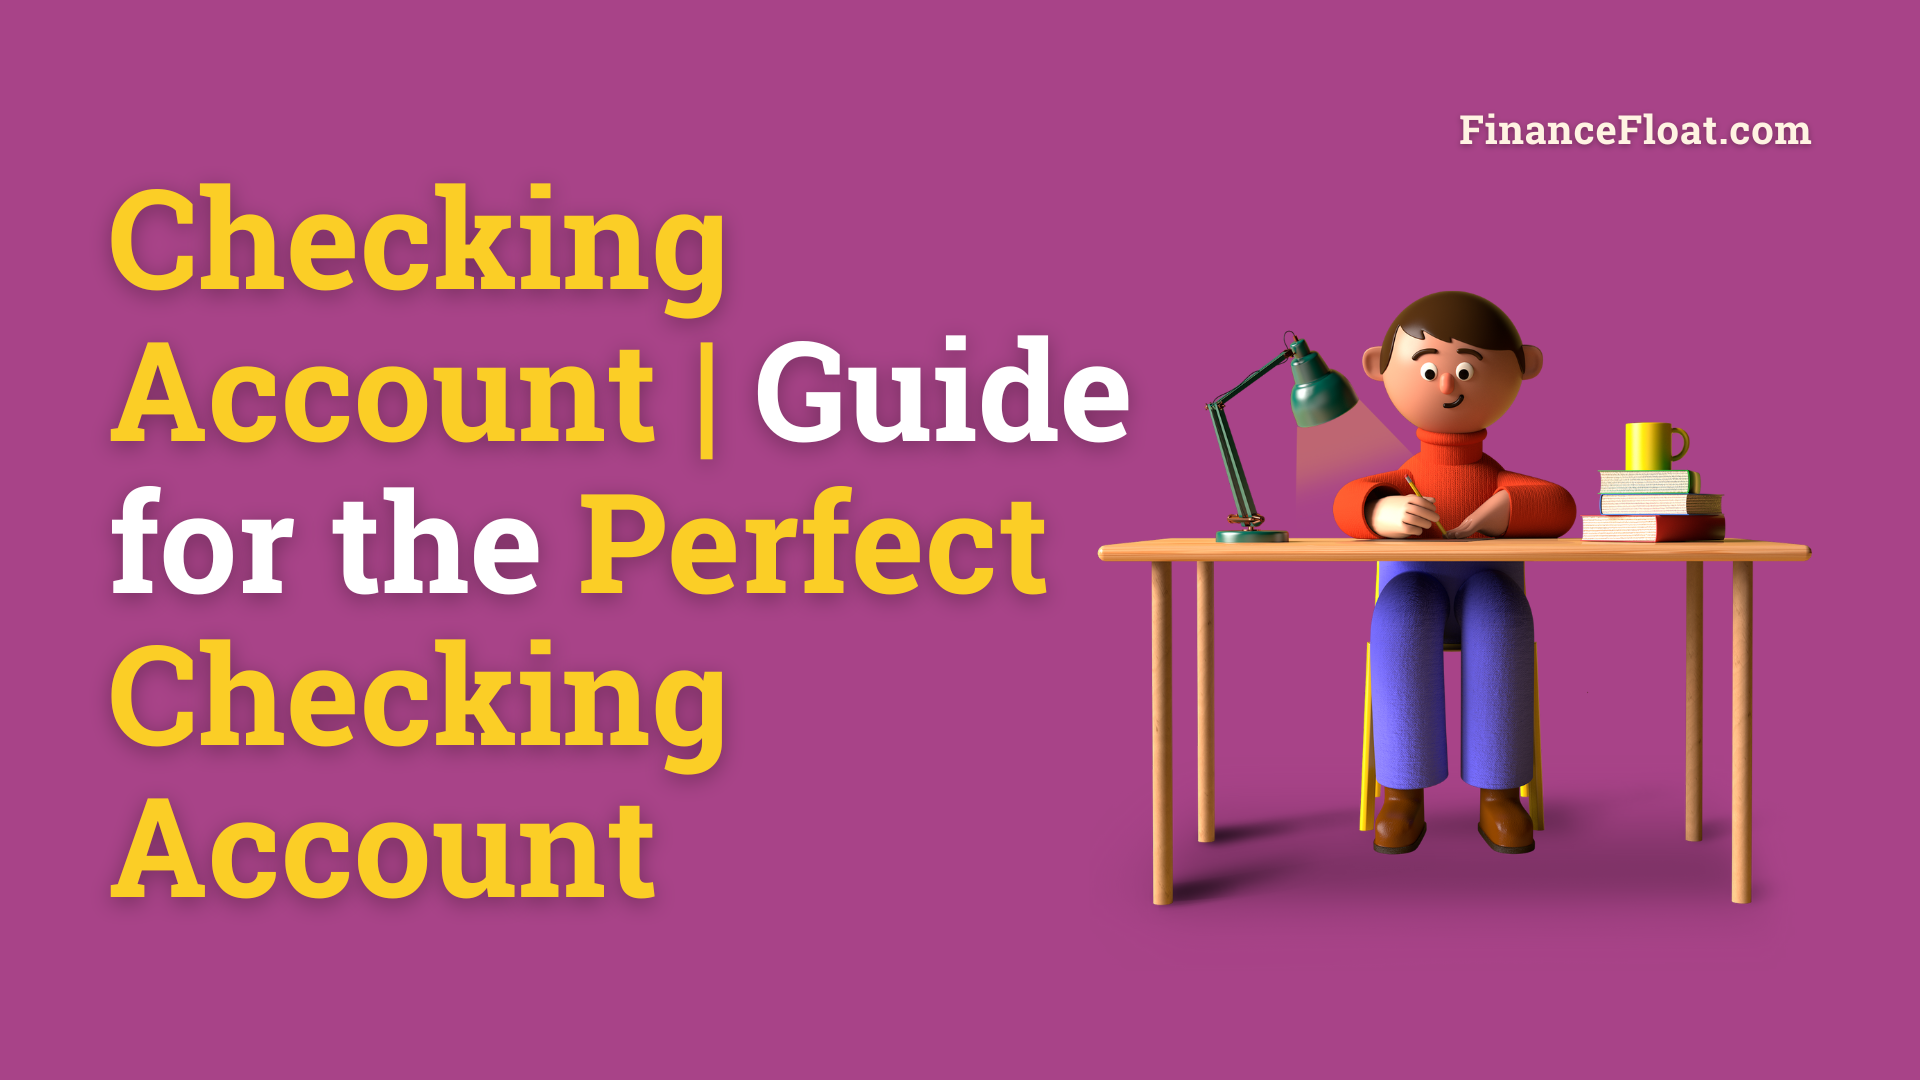 Checking Account Guide for the Perfect Checking Account